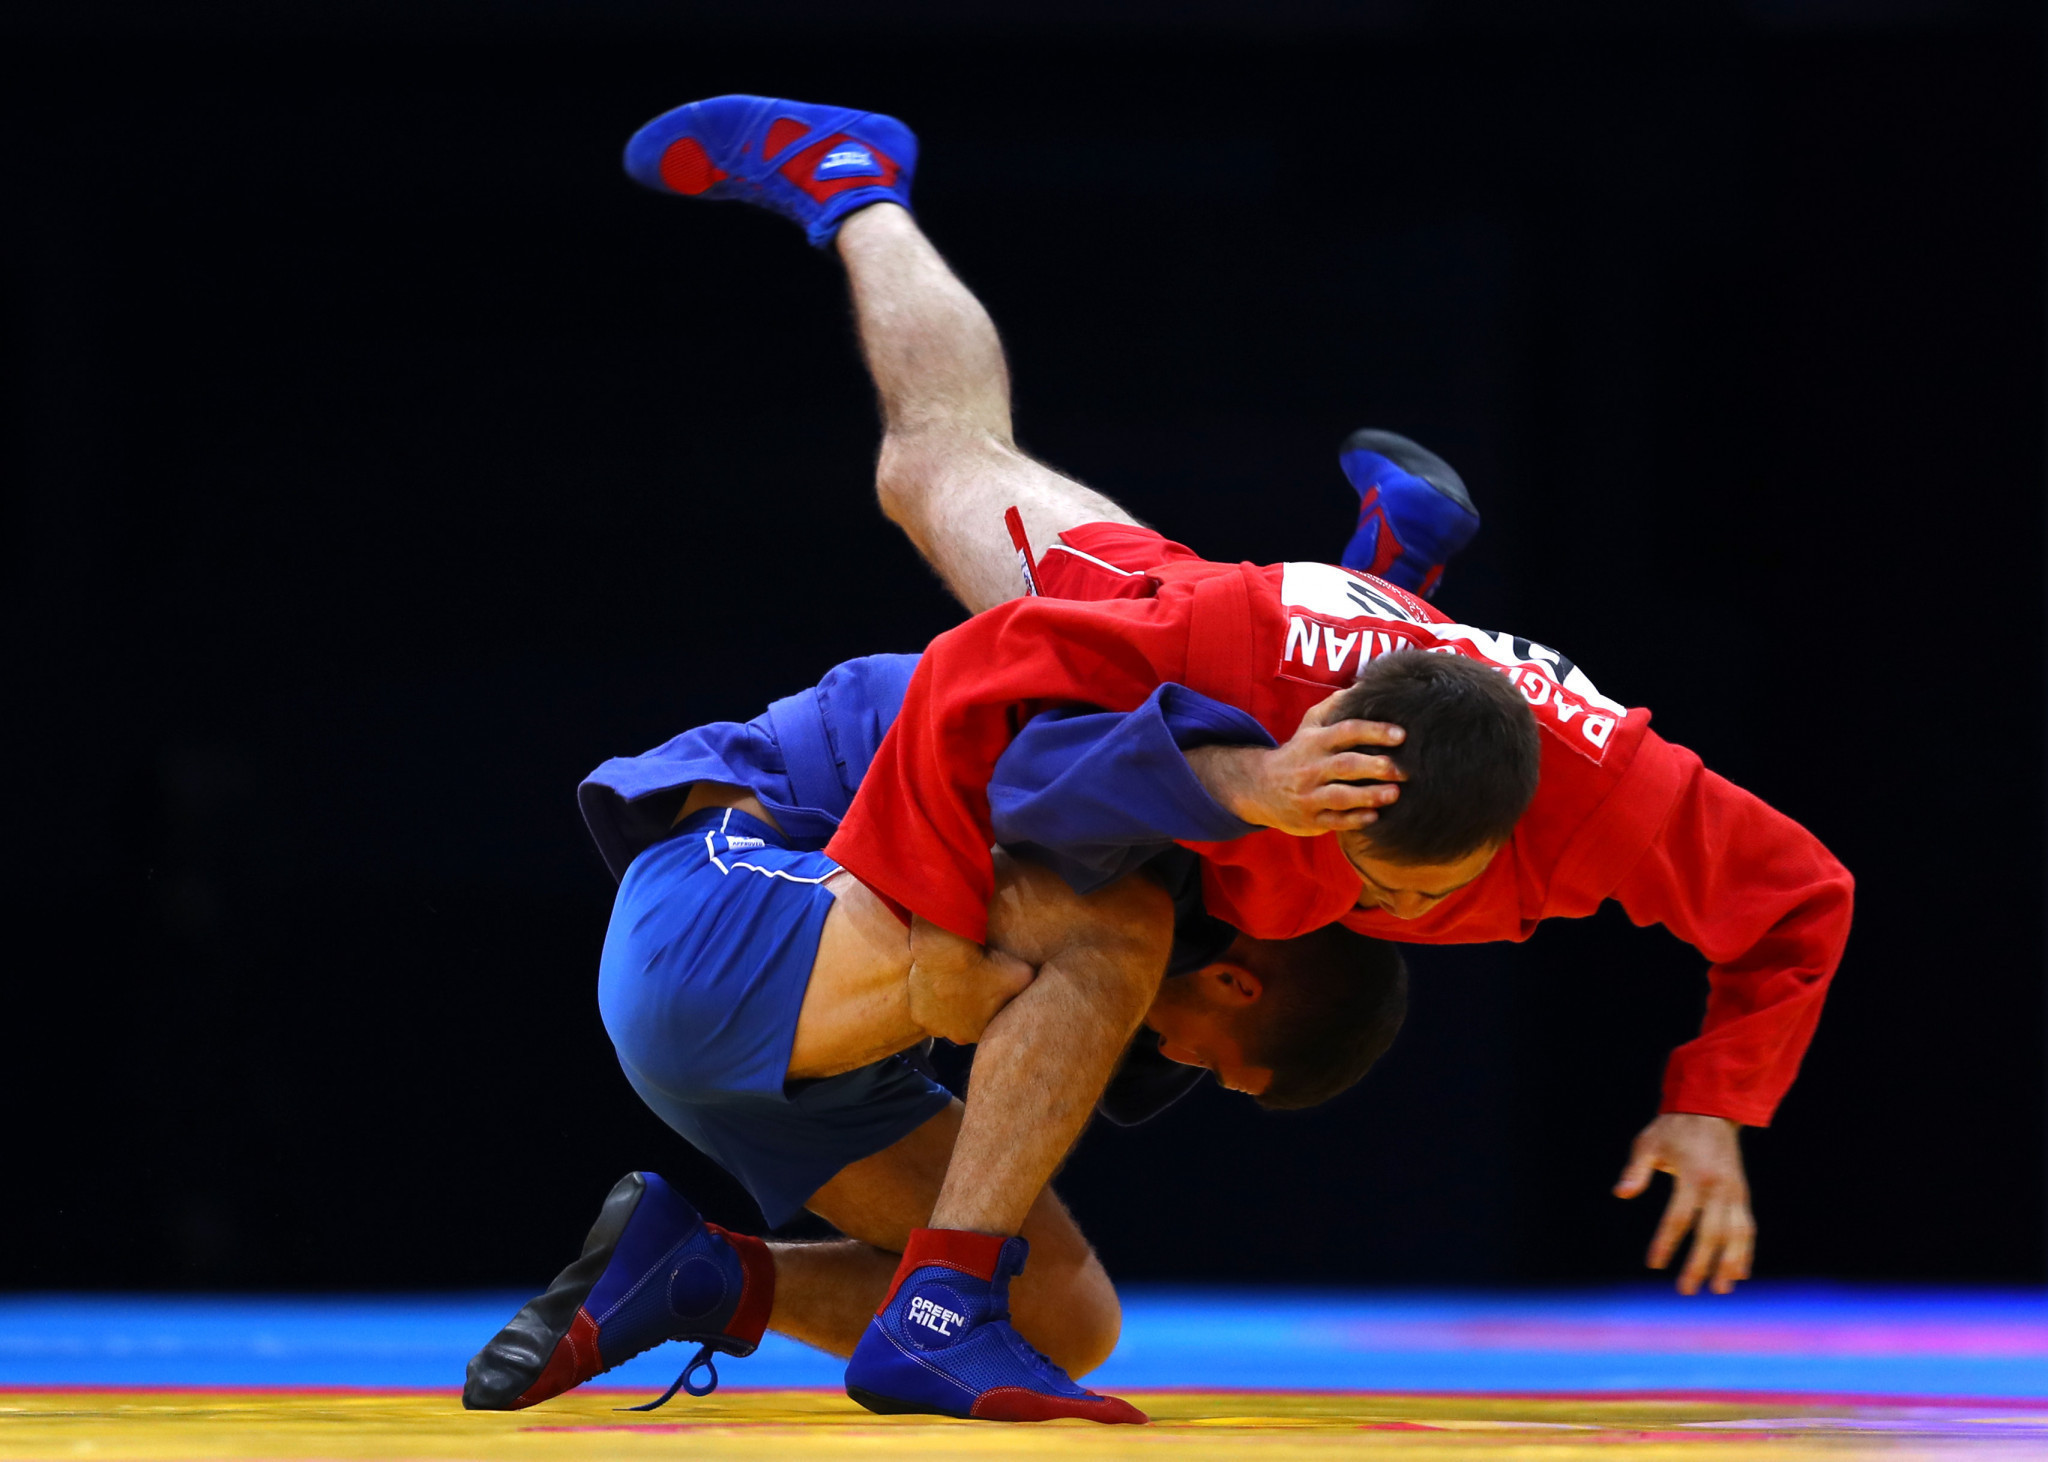 Yekaterinburg could host an international sambo event this year after it lost the rights to the European Championships ©Getty Images